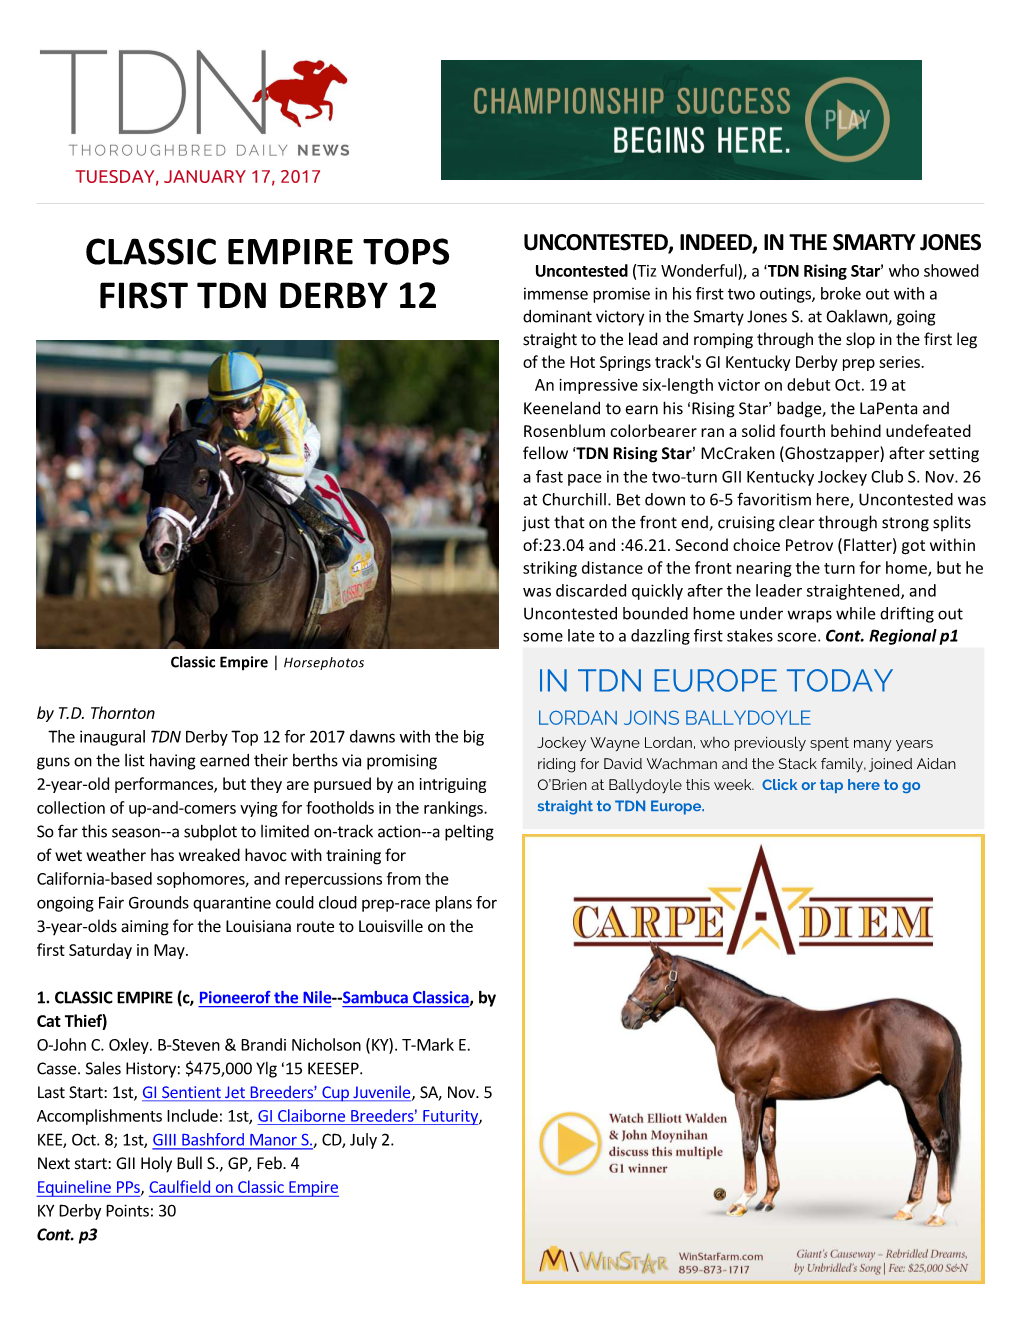 Classic Empire Tops First Tdn Derby 12